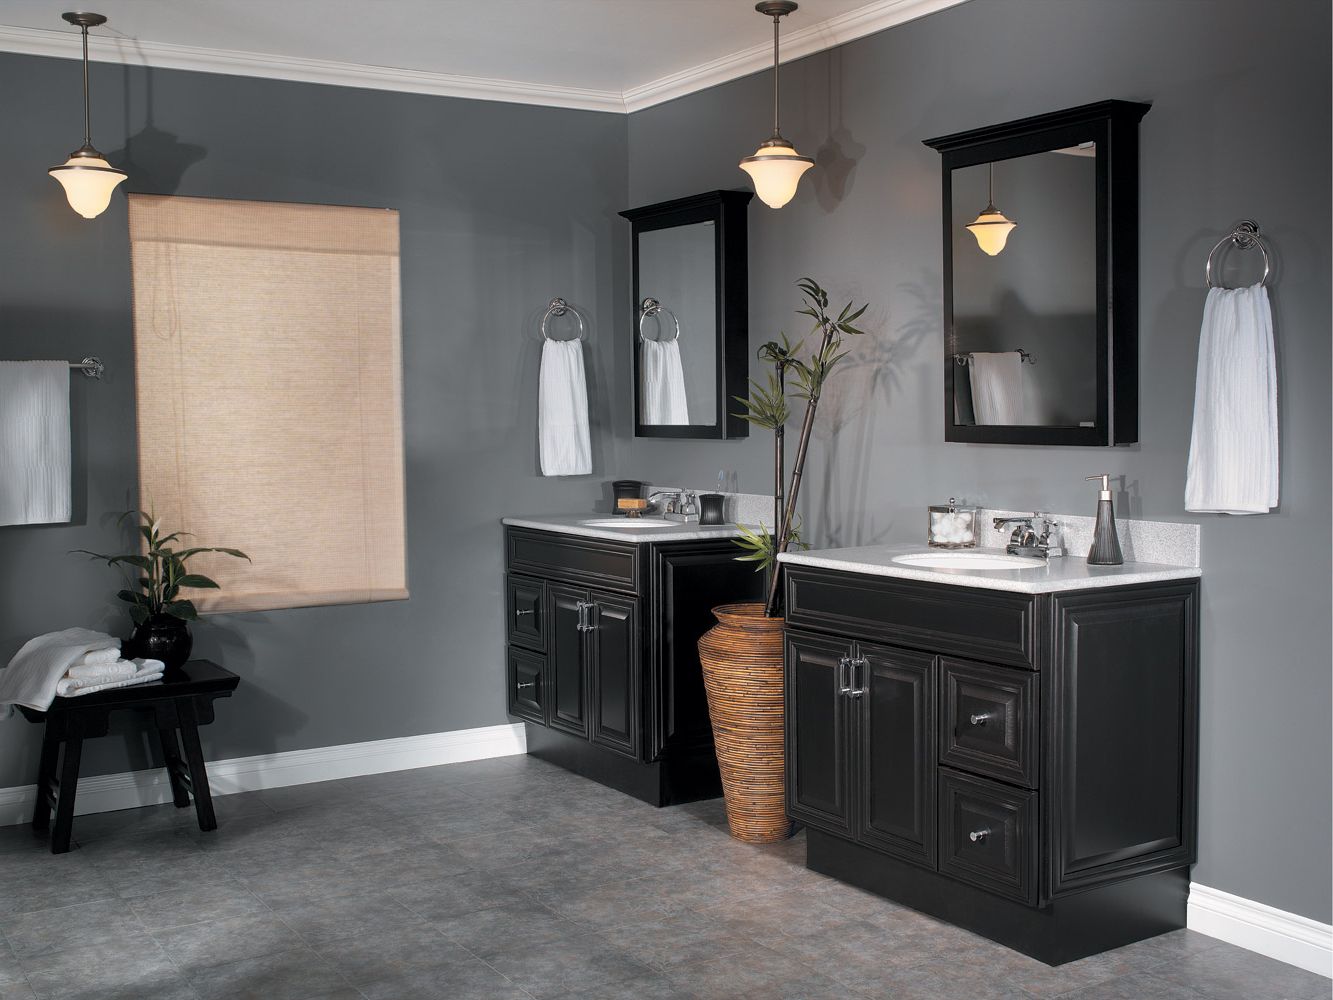 Quirky Pendant Lighting Also Amazing Black Bathroom Vanity Design Plus Cozy Wooden Bench And Gray Wall Idea (Photo 2118 of 7825)